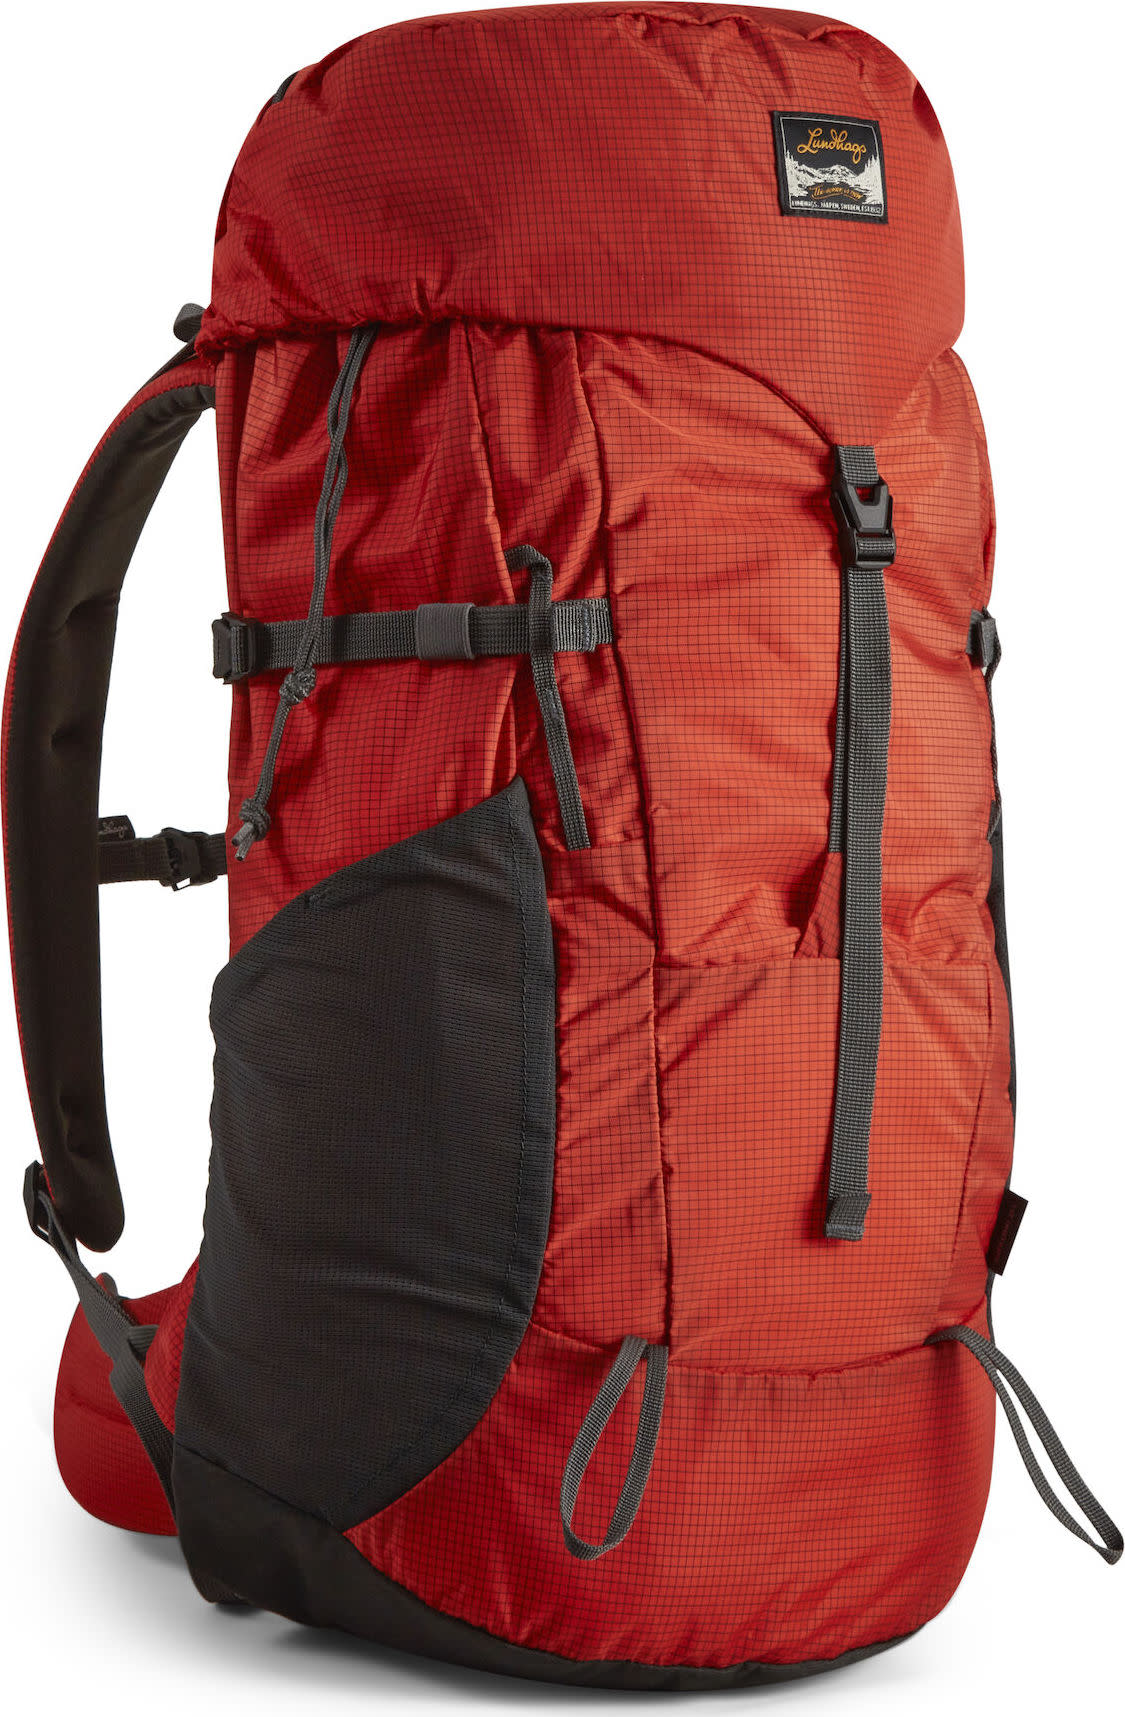 Lundhags Tived Light 35 L Lively Red